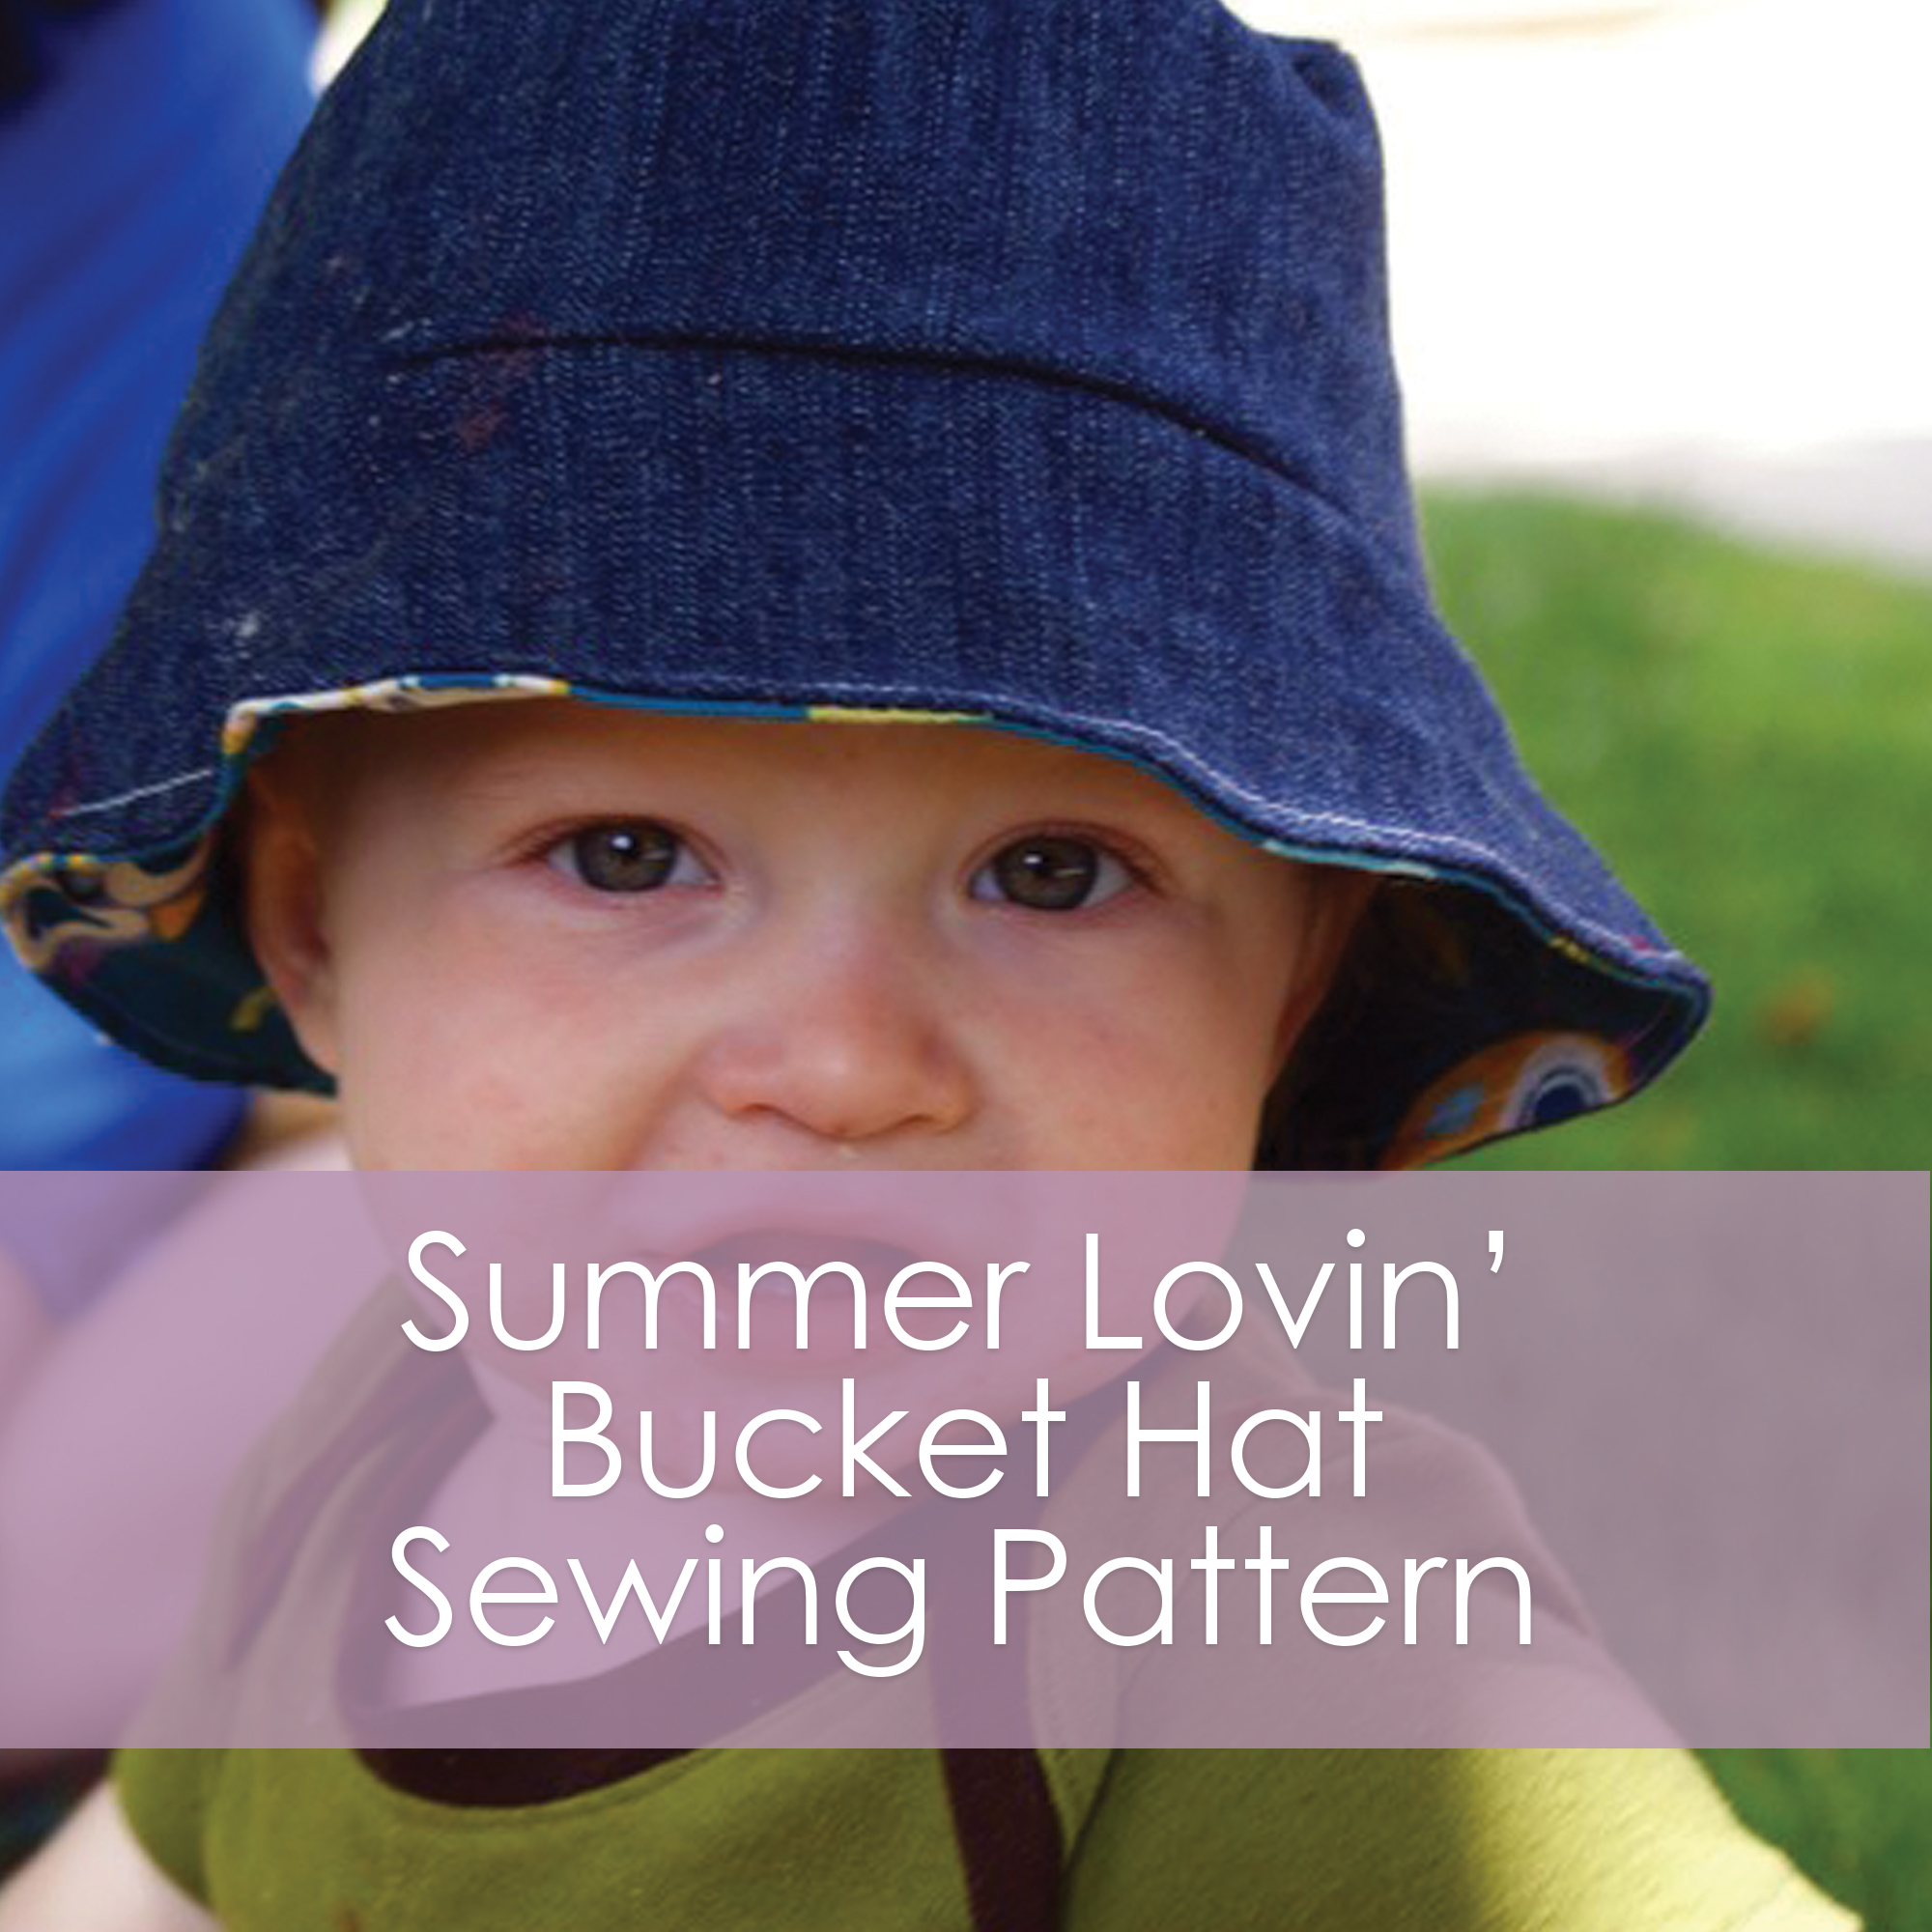 Summer Lovin' Bucket Hat Free Sewing Pattern – Muse of the Morning